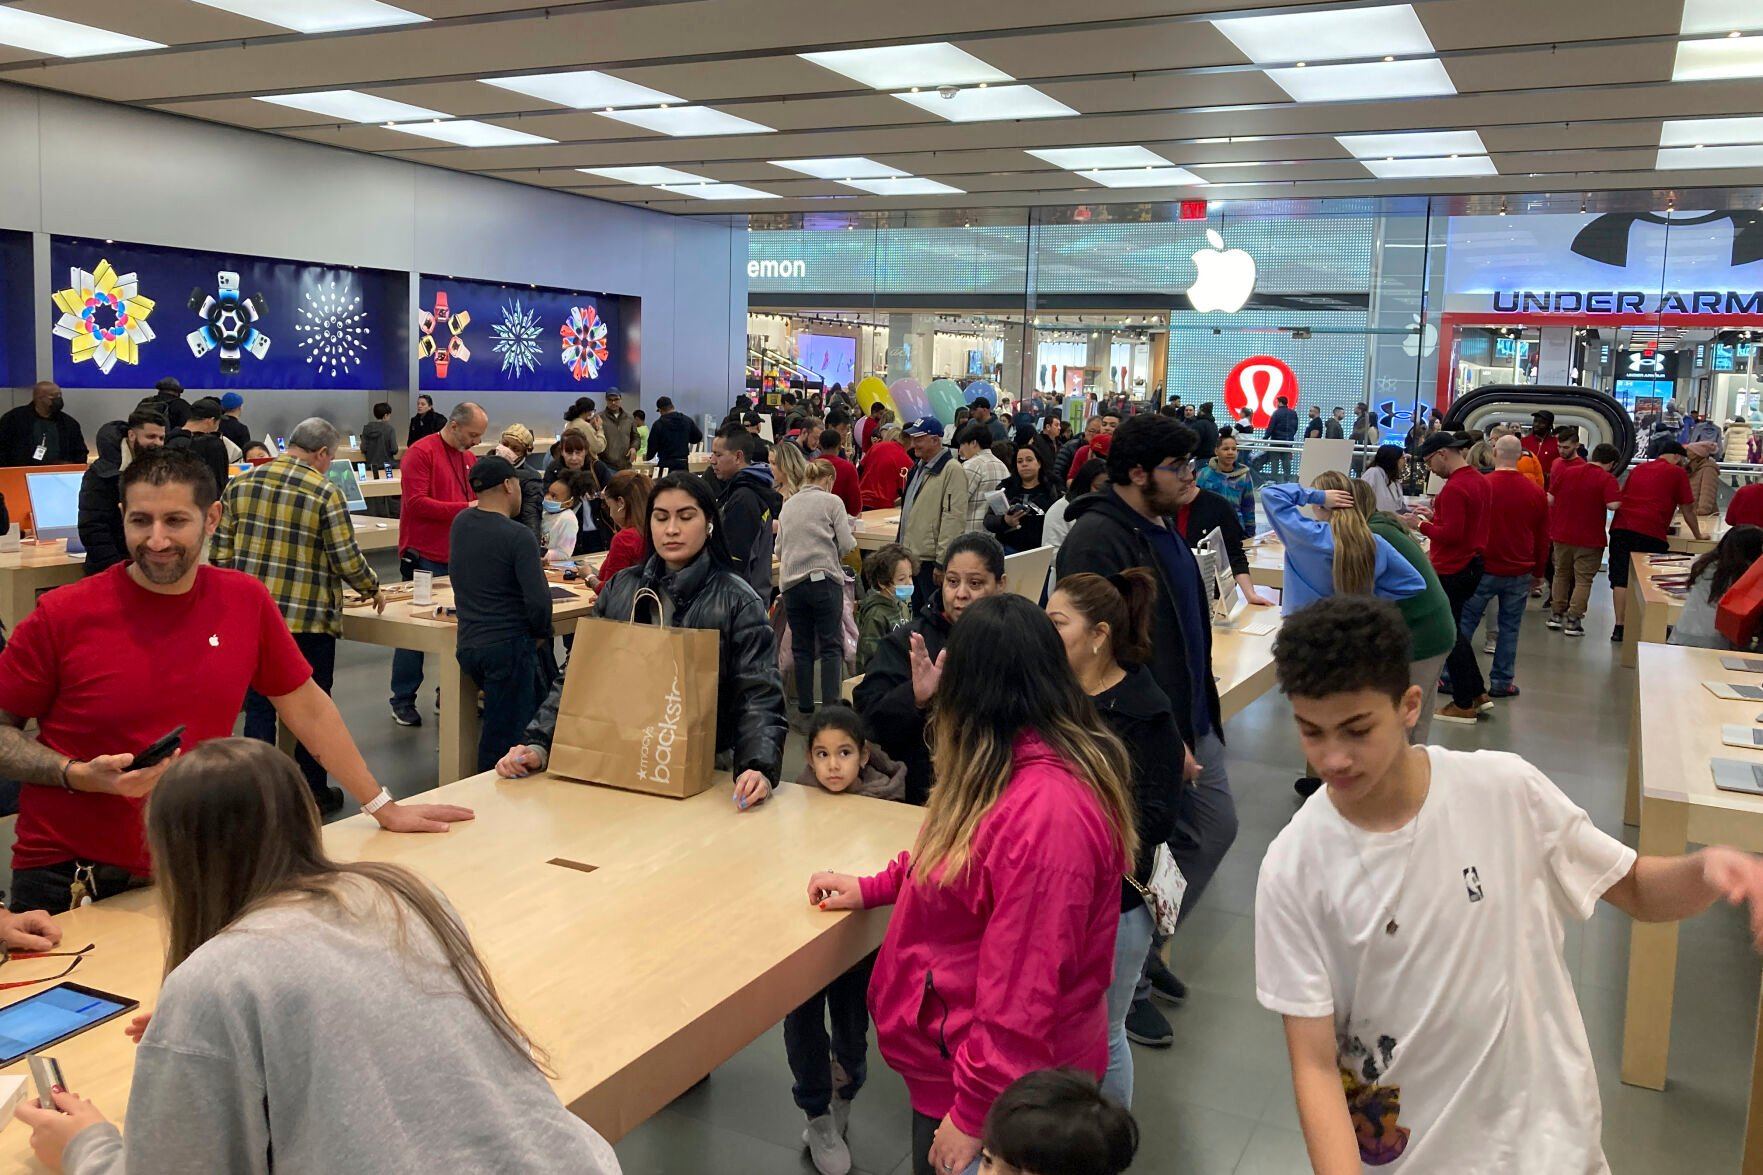 <p>File - People shop at an Apple store in the Westfield Garden State Plaza mall in Paramus, New Jersey, on Saturday, December 17, 2022. On Friday, the Commerce Department issues its February report on consumer spending. (AP Photo/Ted Shaffrey, File)</p>   PHOTO CREDIT: Ted Shaffrey - staff, AP